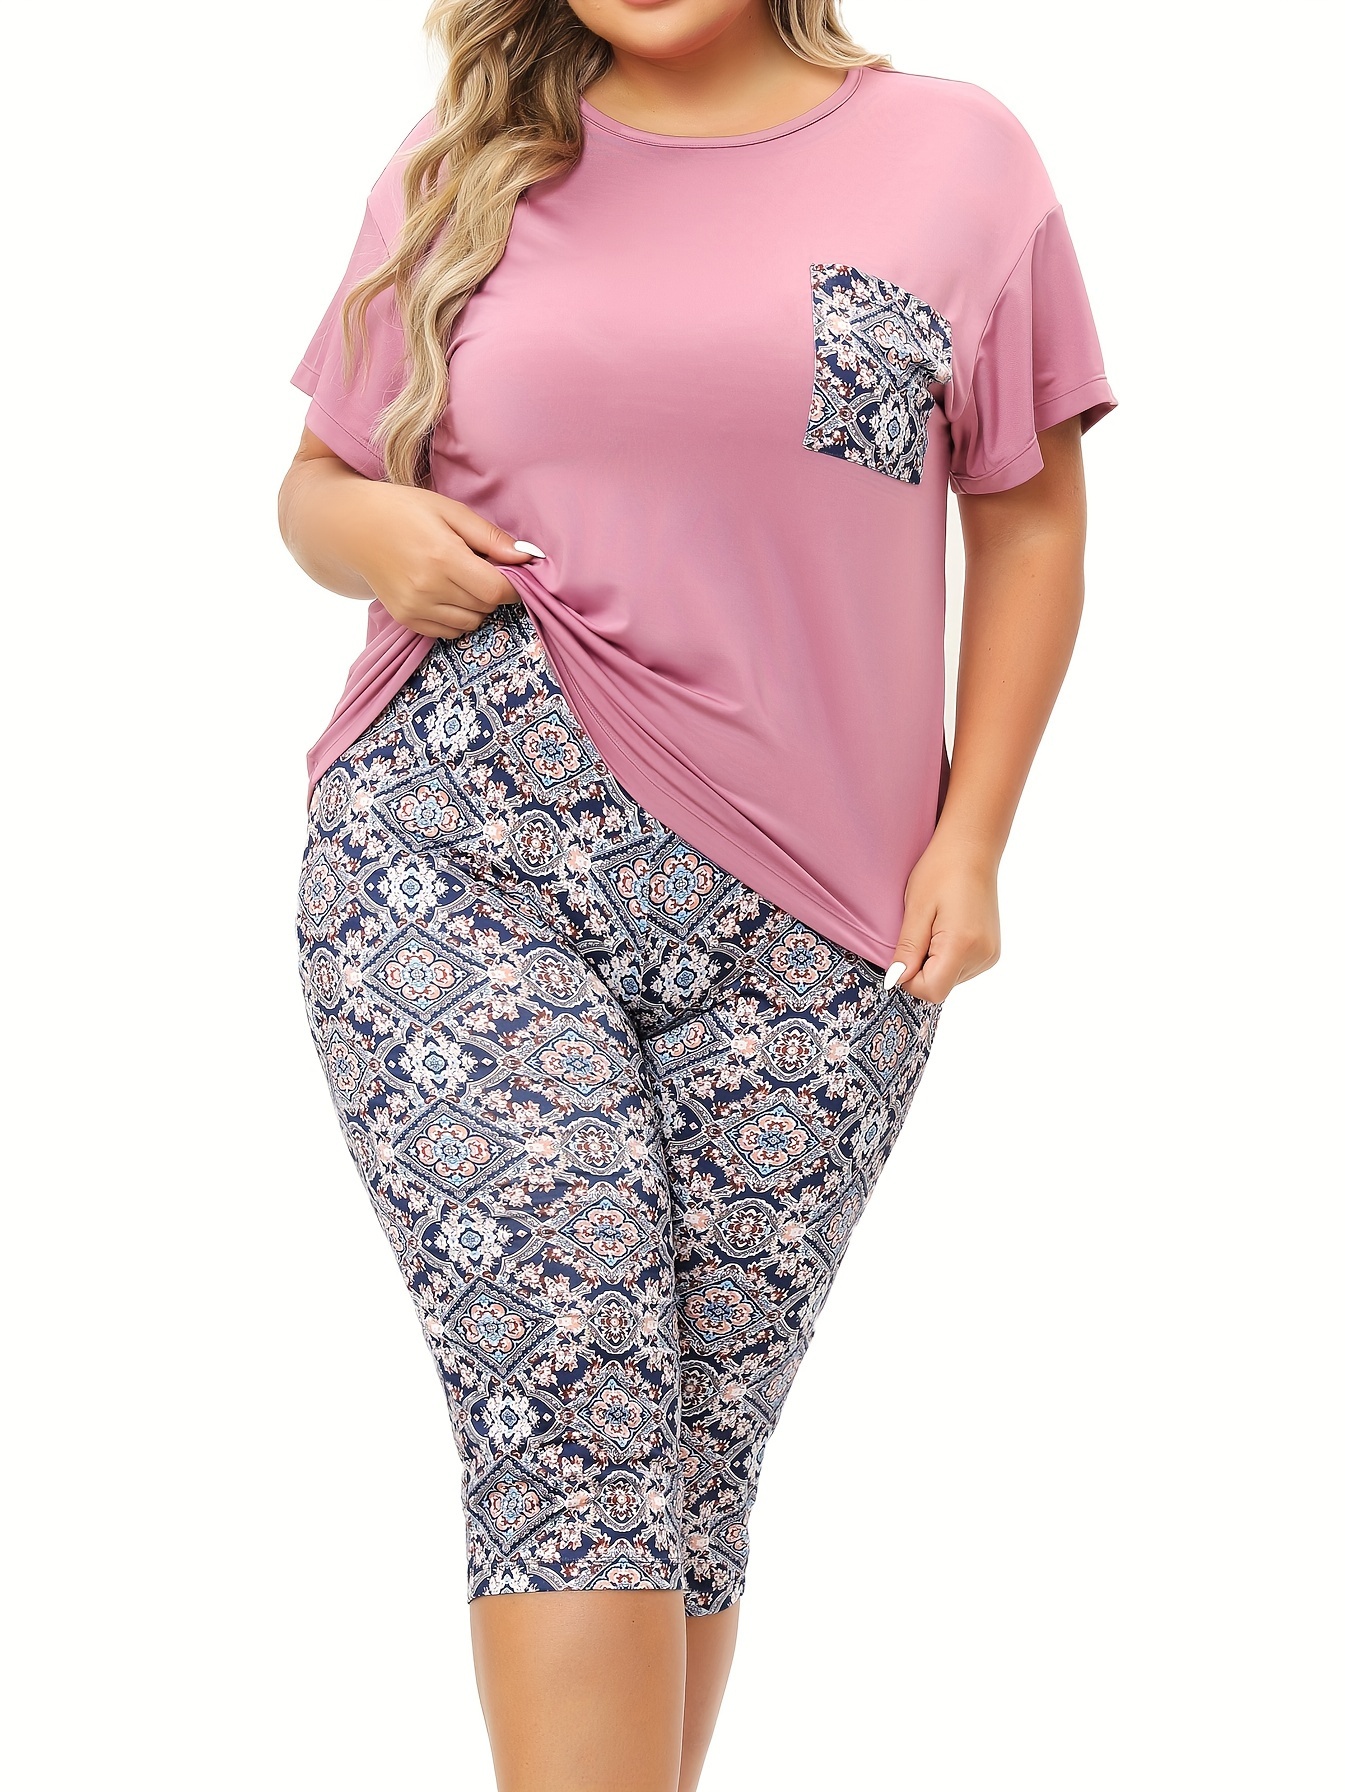 Plus Size Dressy Capri Outfit. Face Swap. Insert Your Face ID:1677103